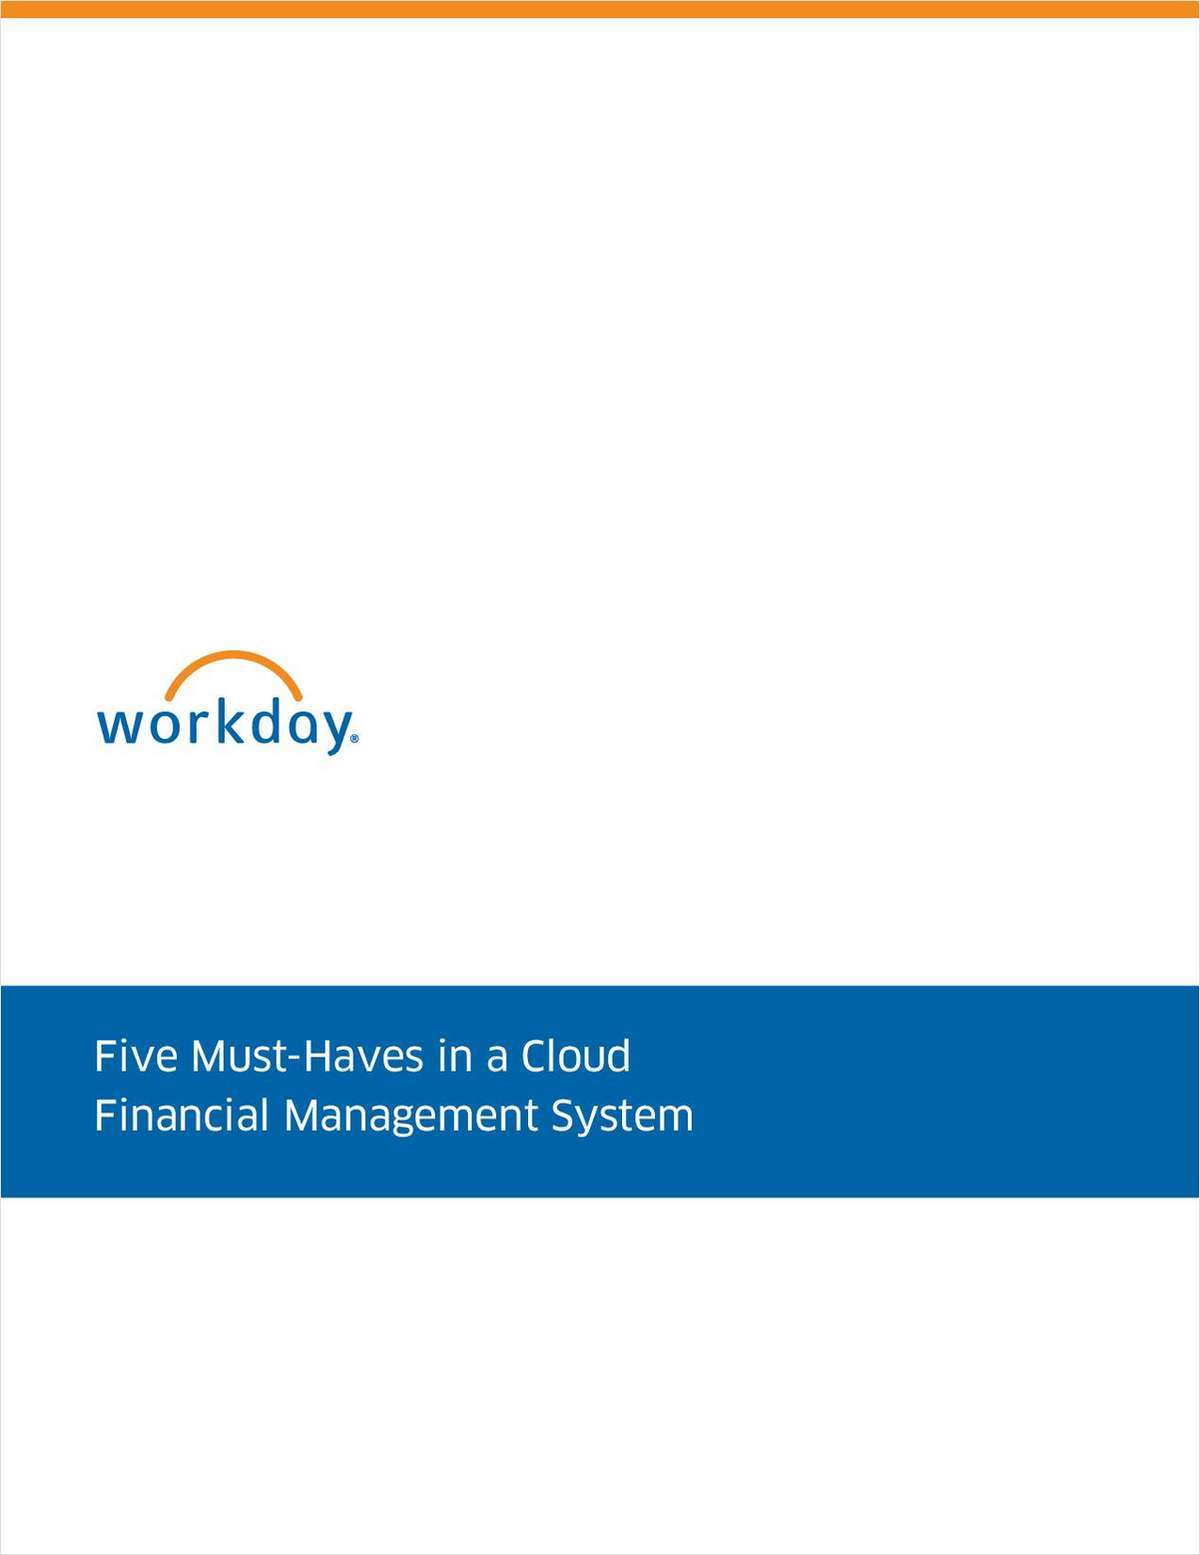 5 Must-Haves in a Cloud Financial Management System